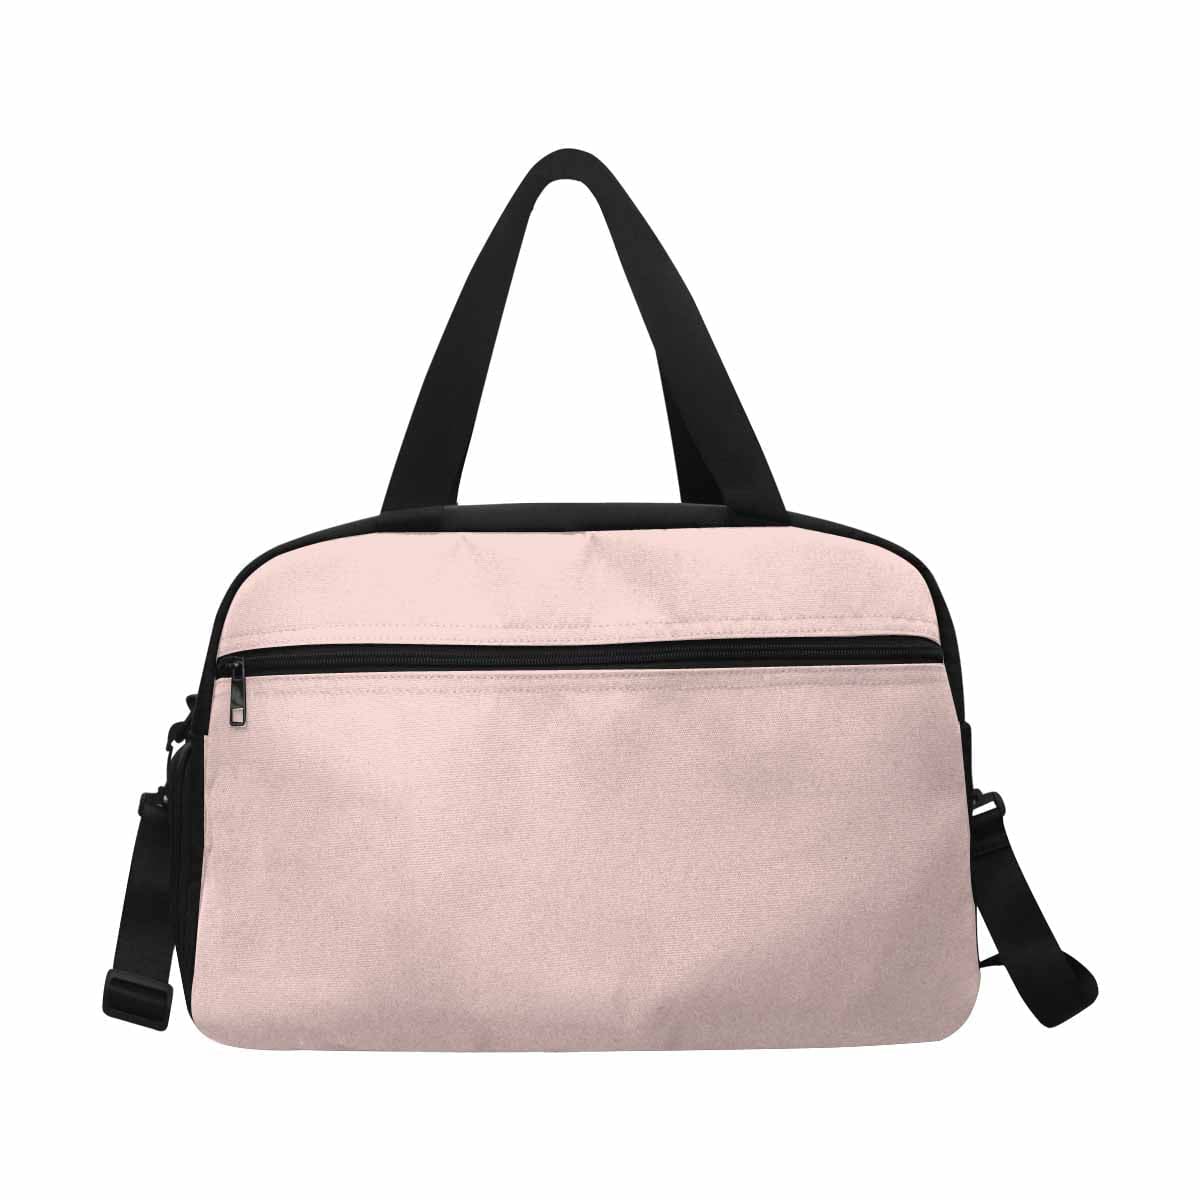 Scallop Seashell Pink Tote And Crossbody Travel Bag - Bags | Travel Bags